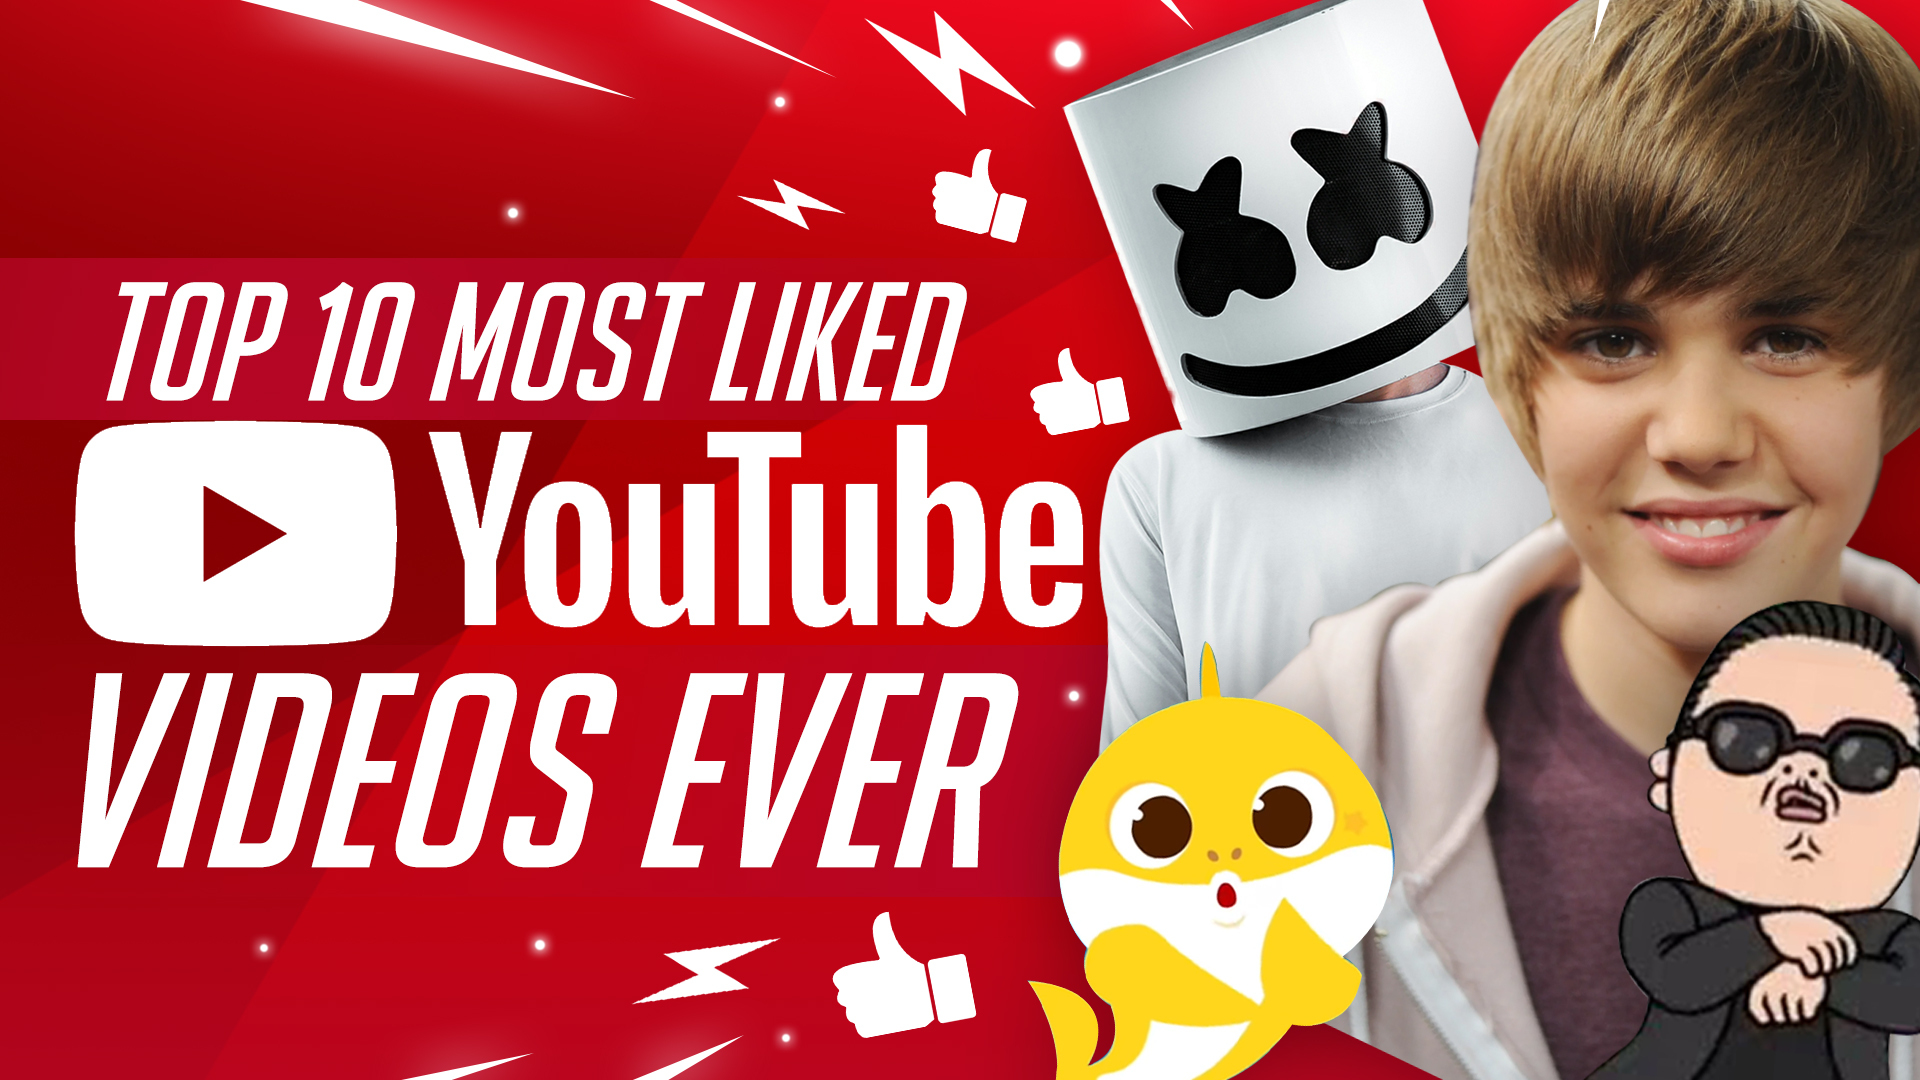 Top 10 Most Liked Youtube Videos Dexerto